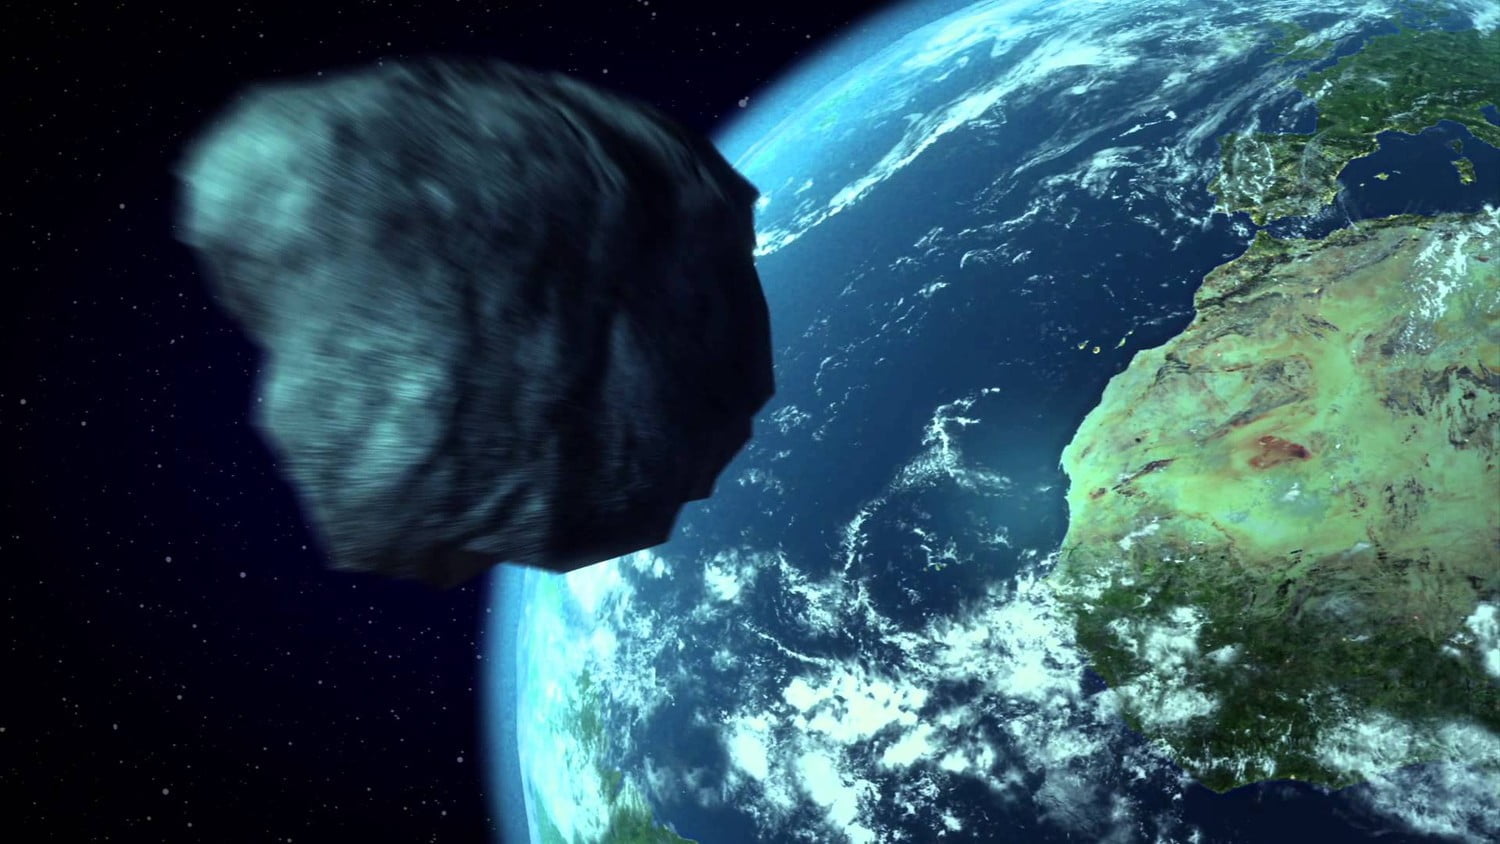 In March an asteroid will fly near the Earth at a record close distance